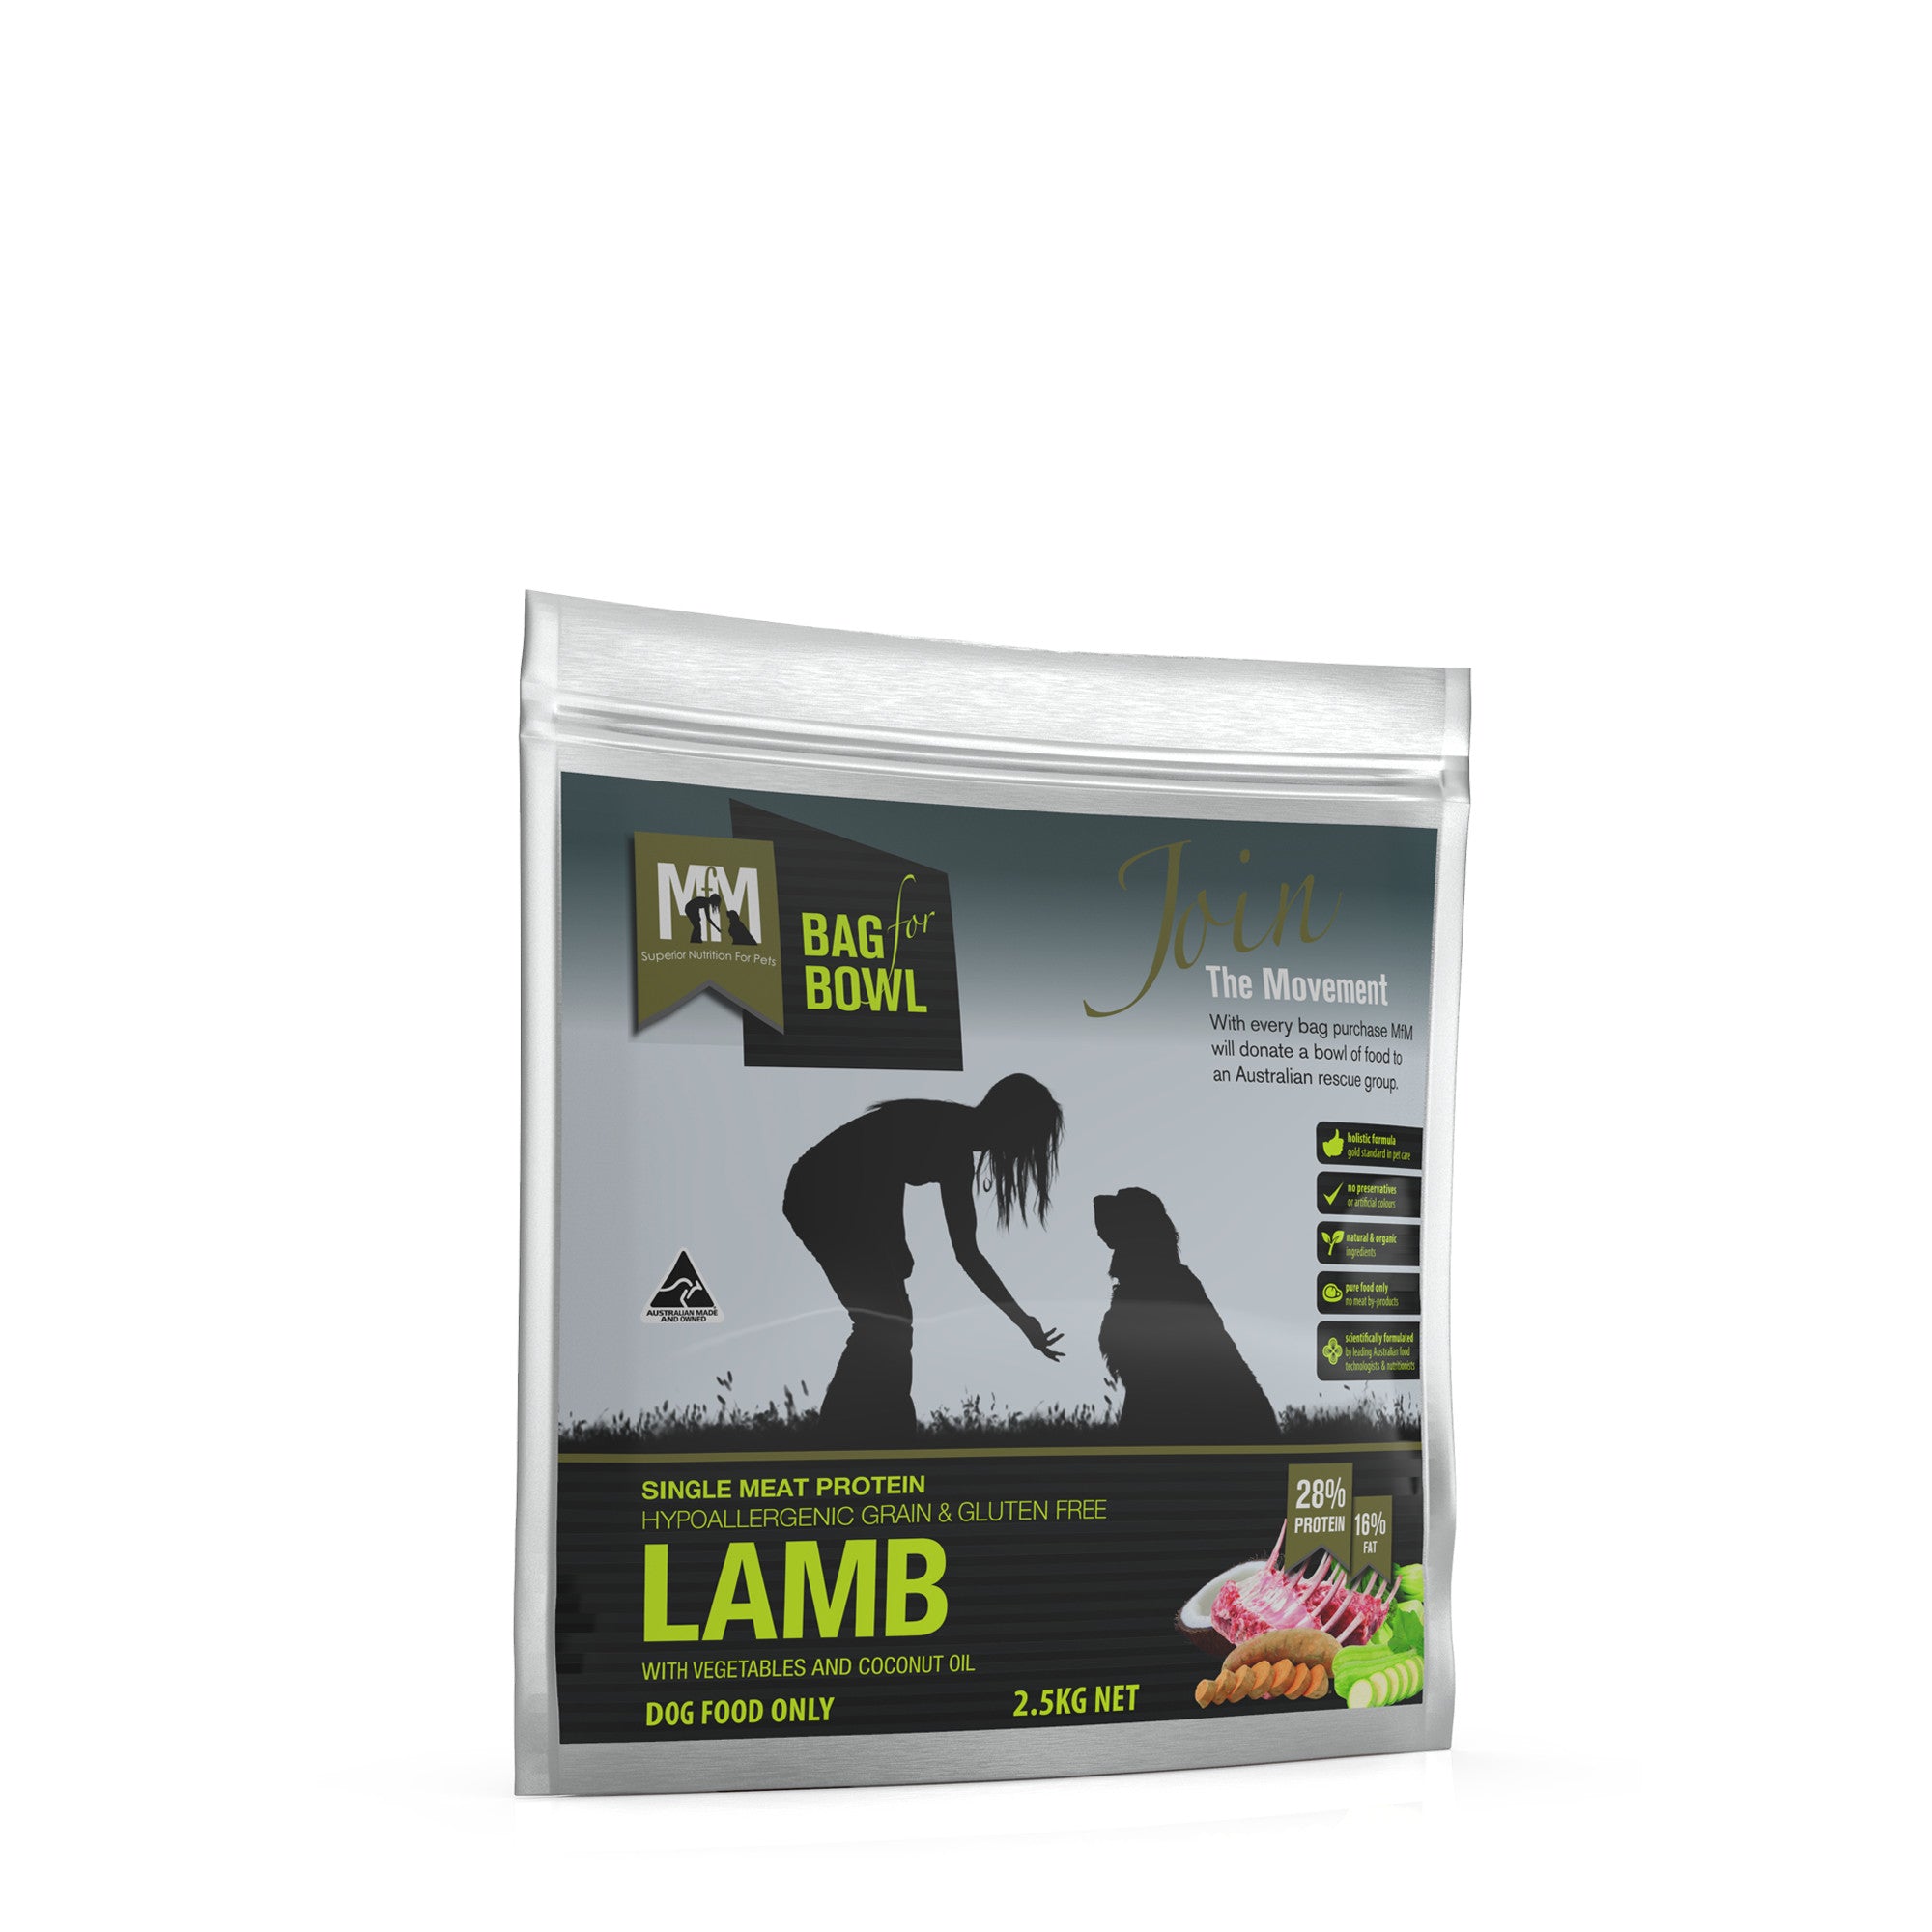 Meals for Mutts Lamb Single Meat Protein Dog Food 2.5kg.